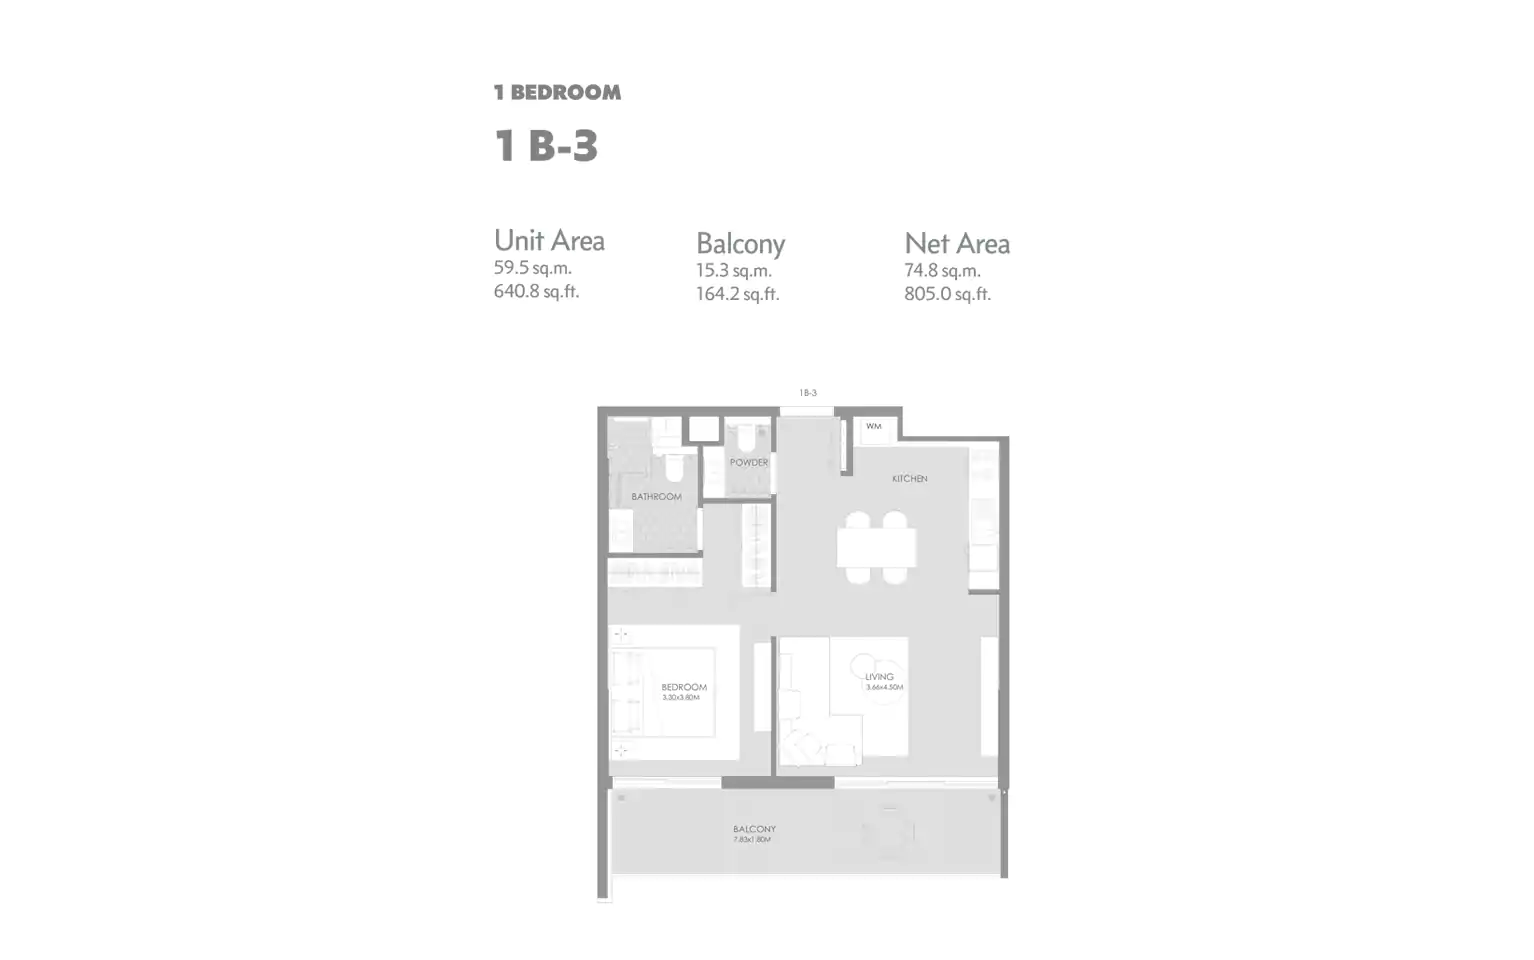 1 Bedroom with Balcony B-3, Size : 640.8 Sq.ft.